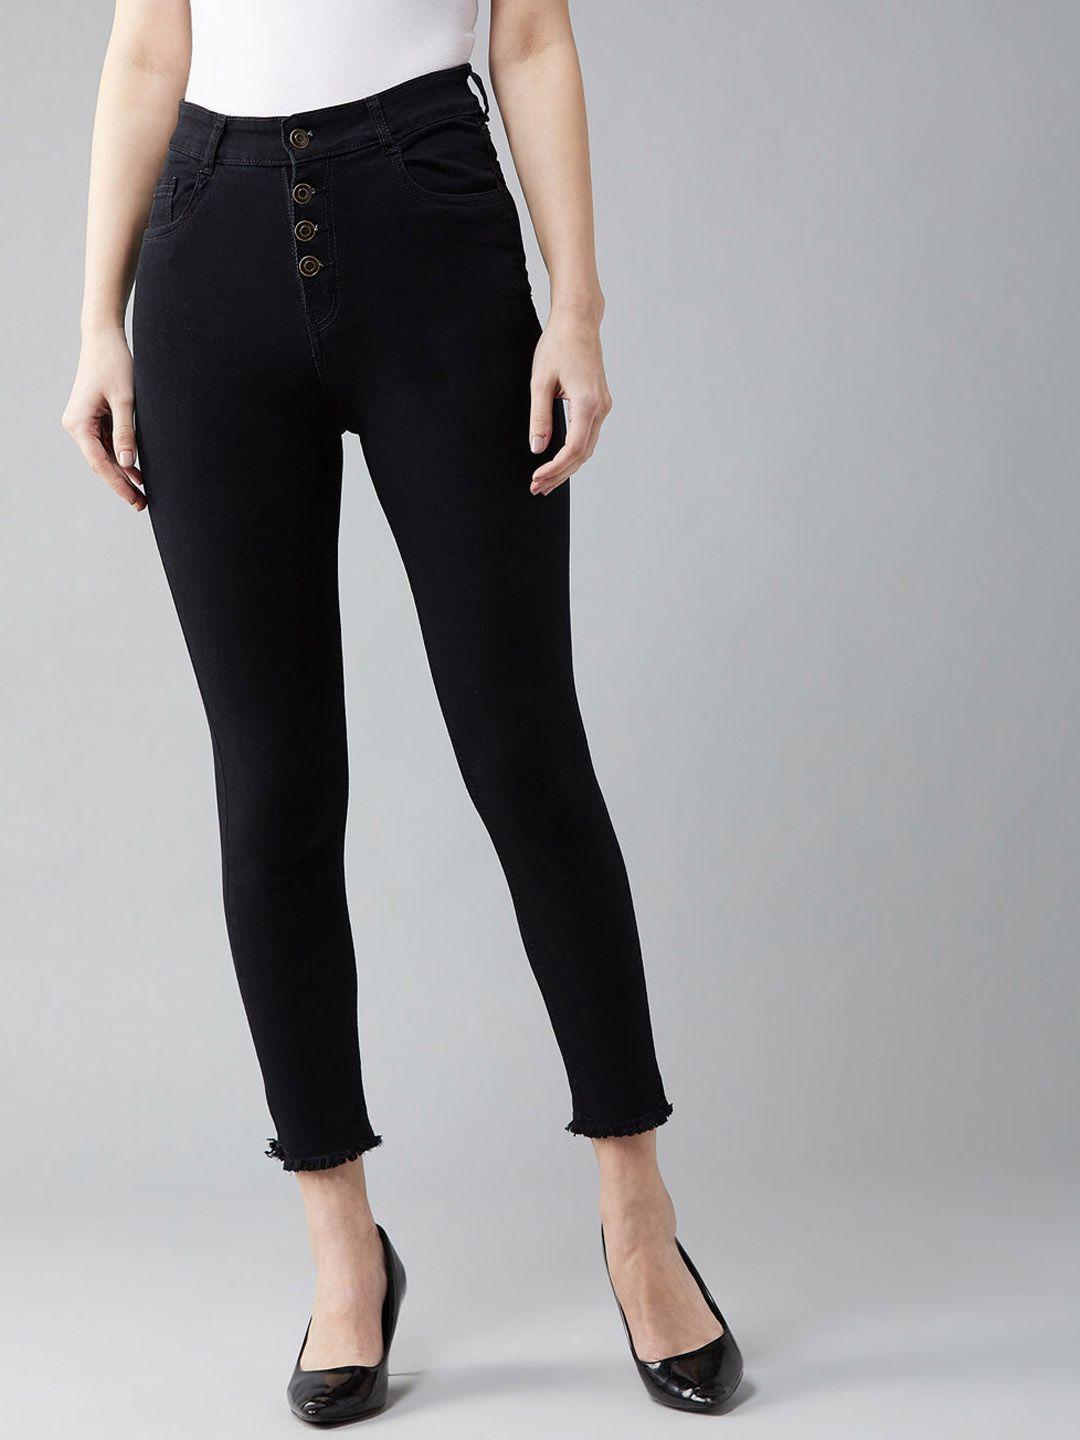 dolce-crudo-women-black-skinny-fit-high-rise-clean-look-stretchable-cropped-jeans